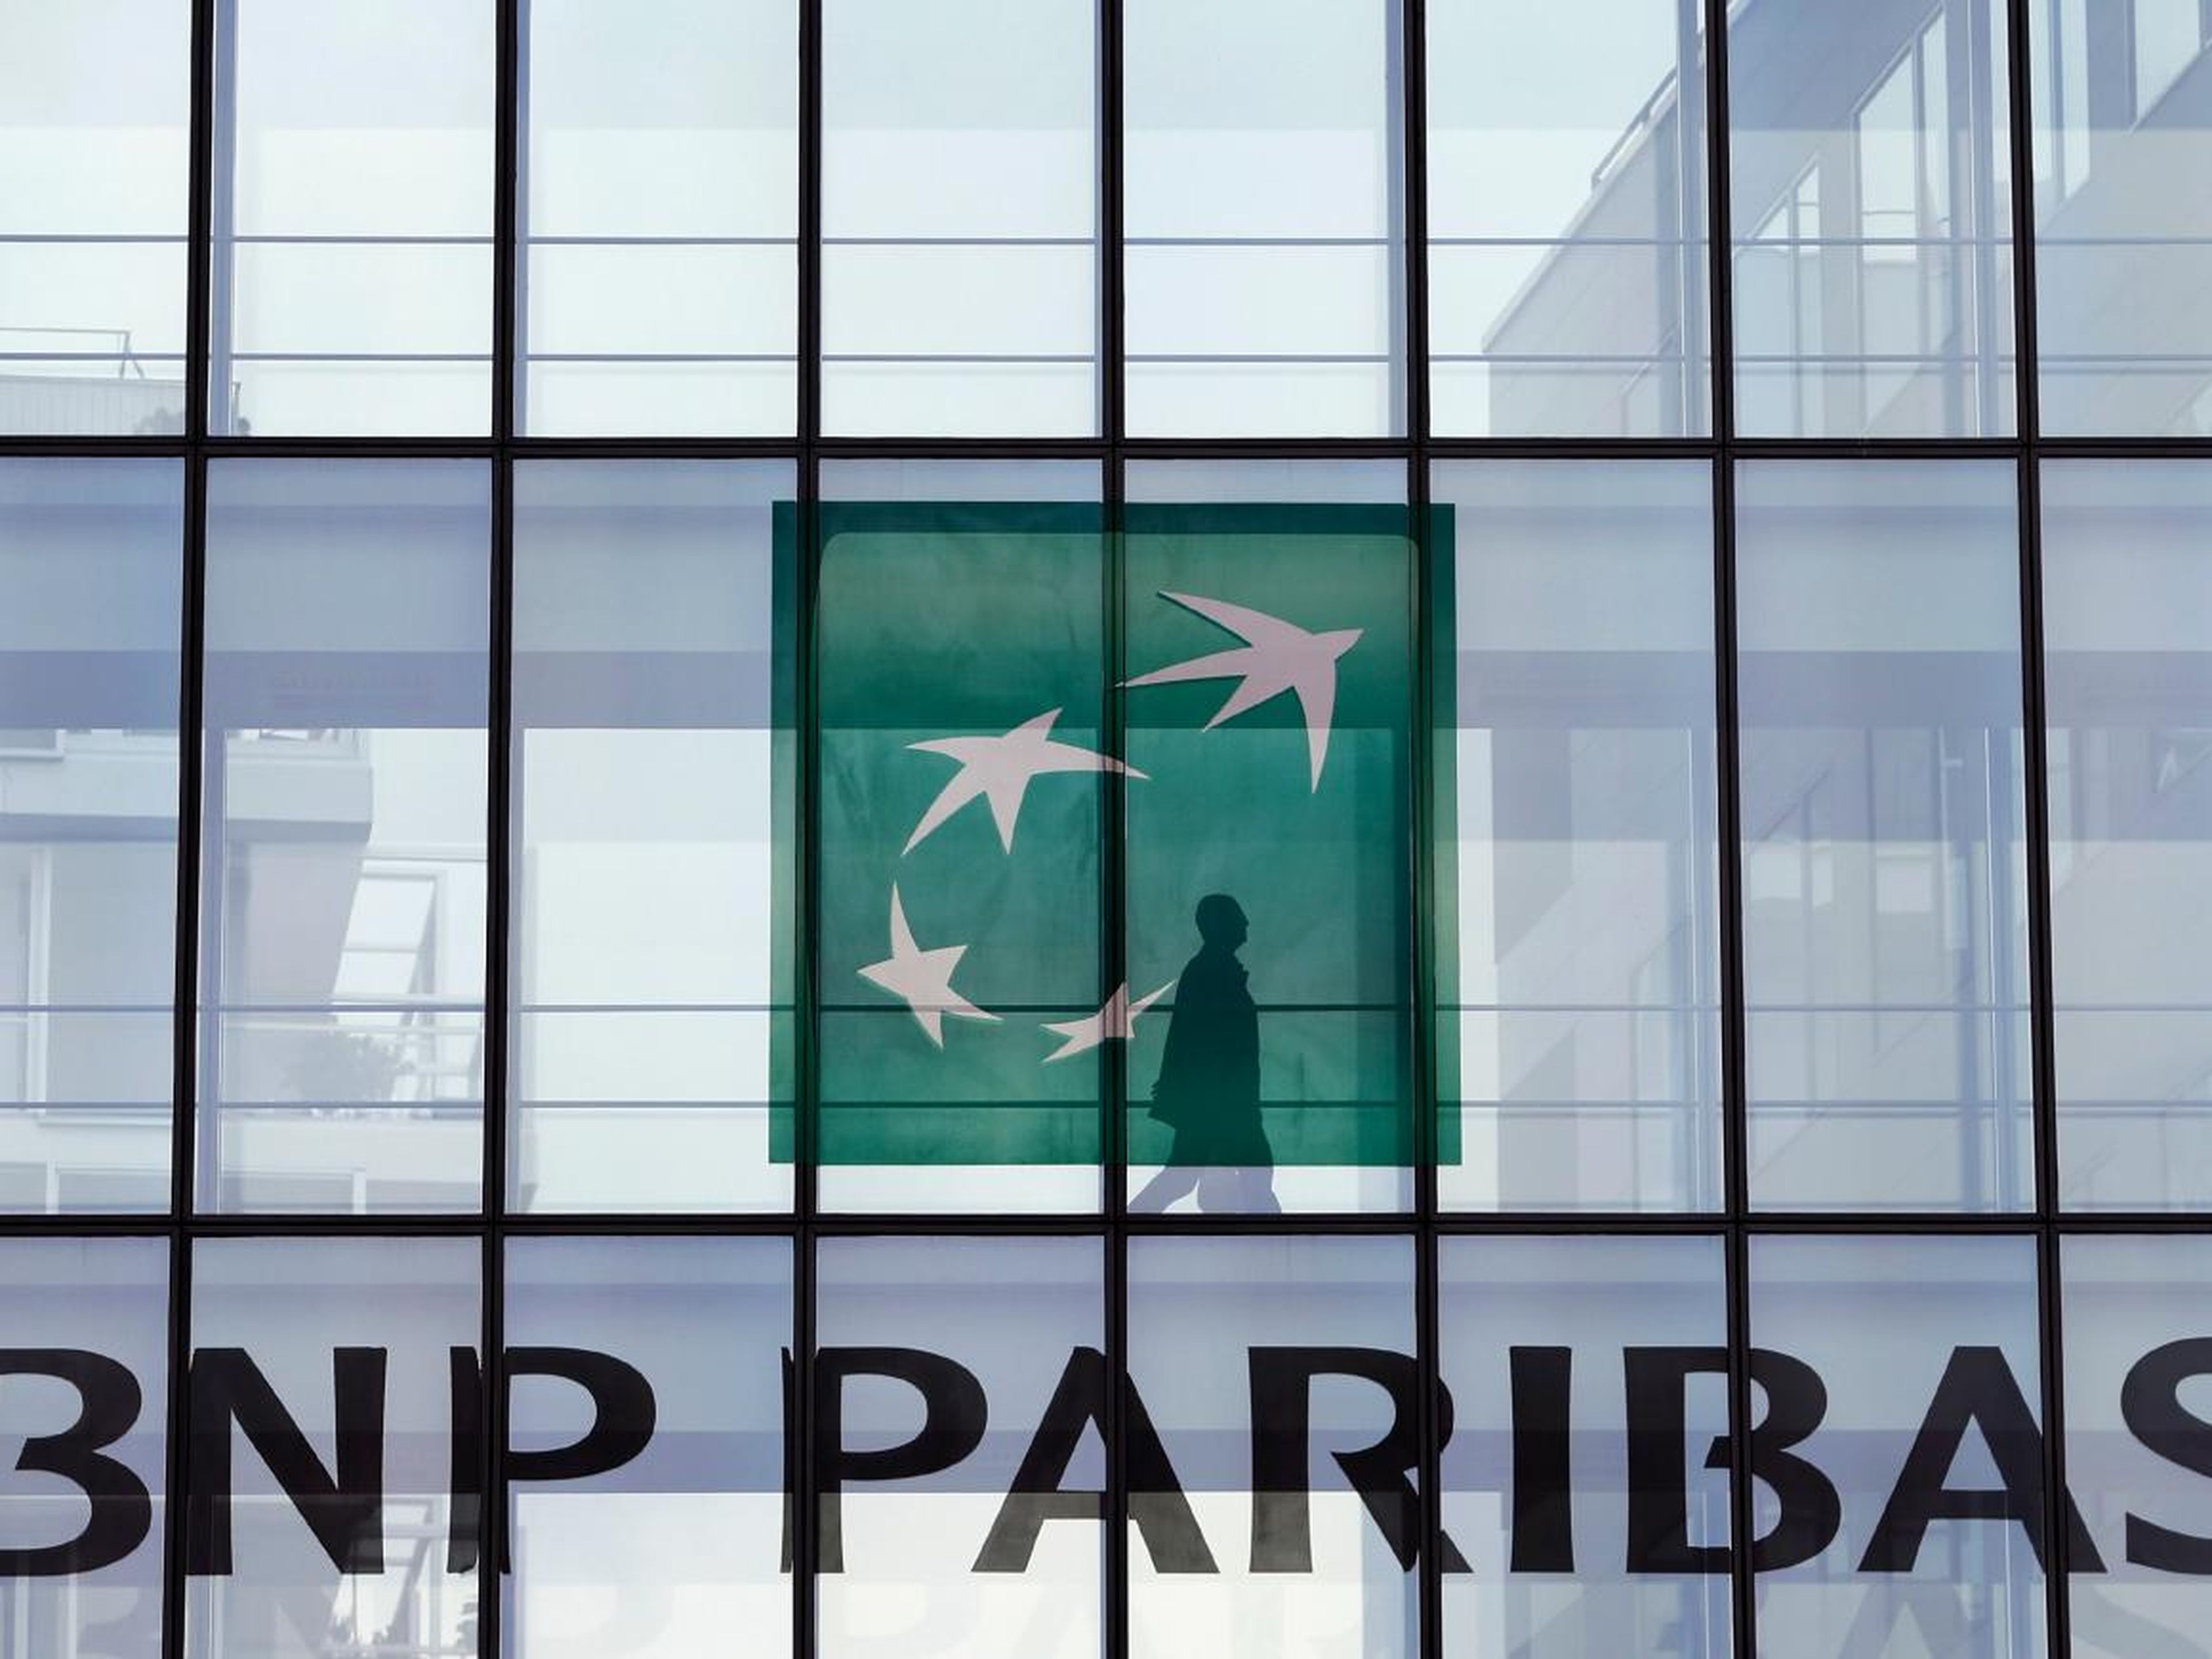 AUG. 9, 2007: France's largest bank, BNP Paribas, freezes withdrawals from three investment funds after U.S. subprime mortgage losses crush markets. "The complete evaporation of liquidity in certain market segments of the U.S.